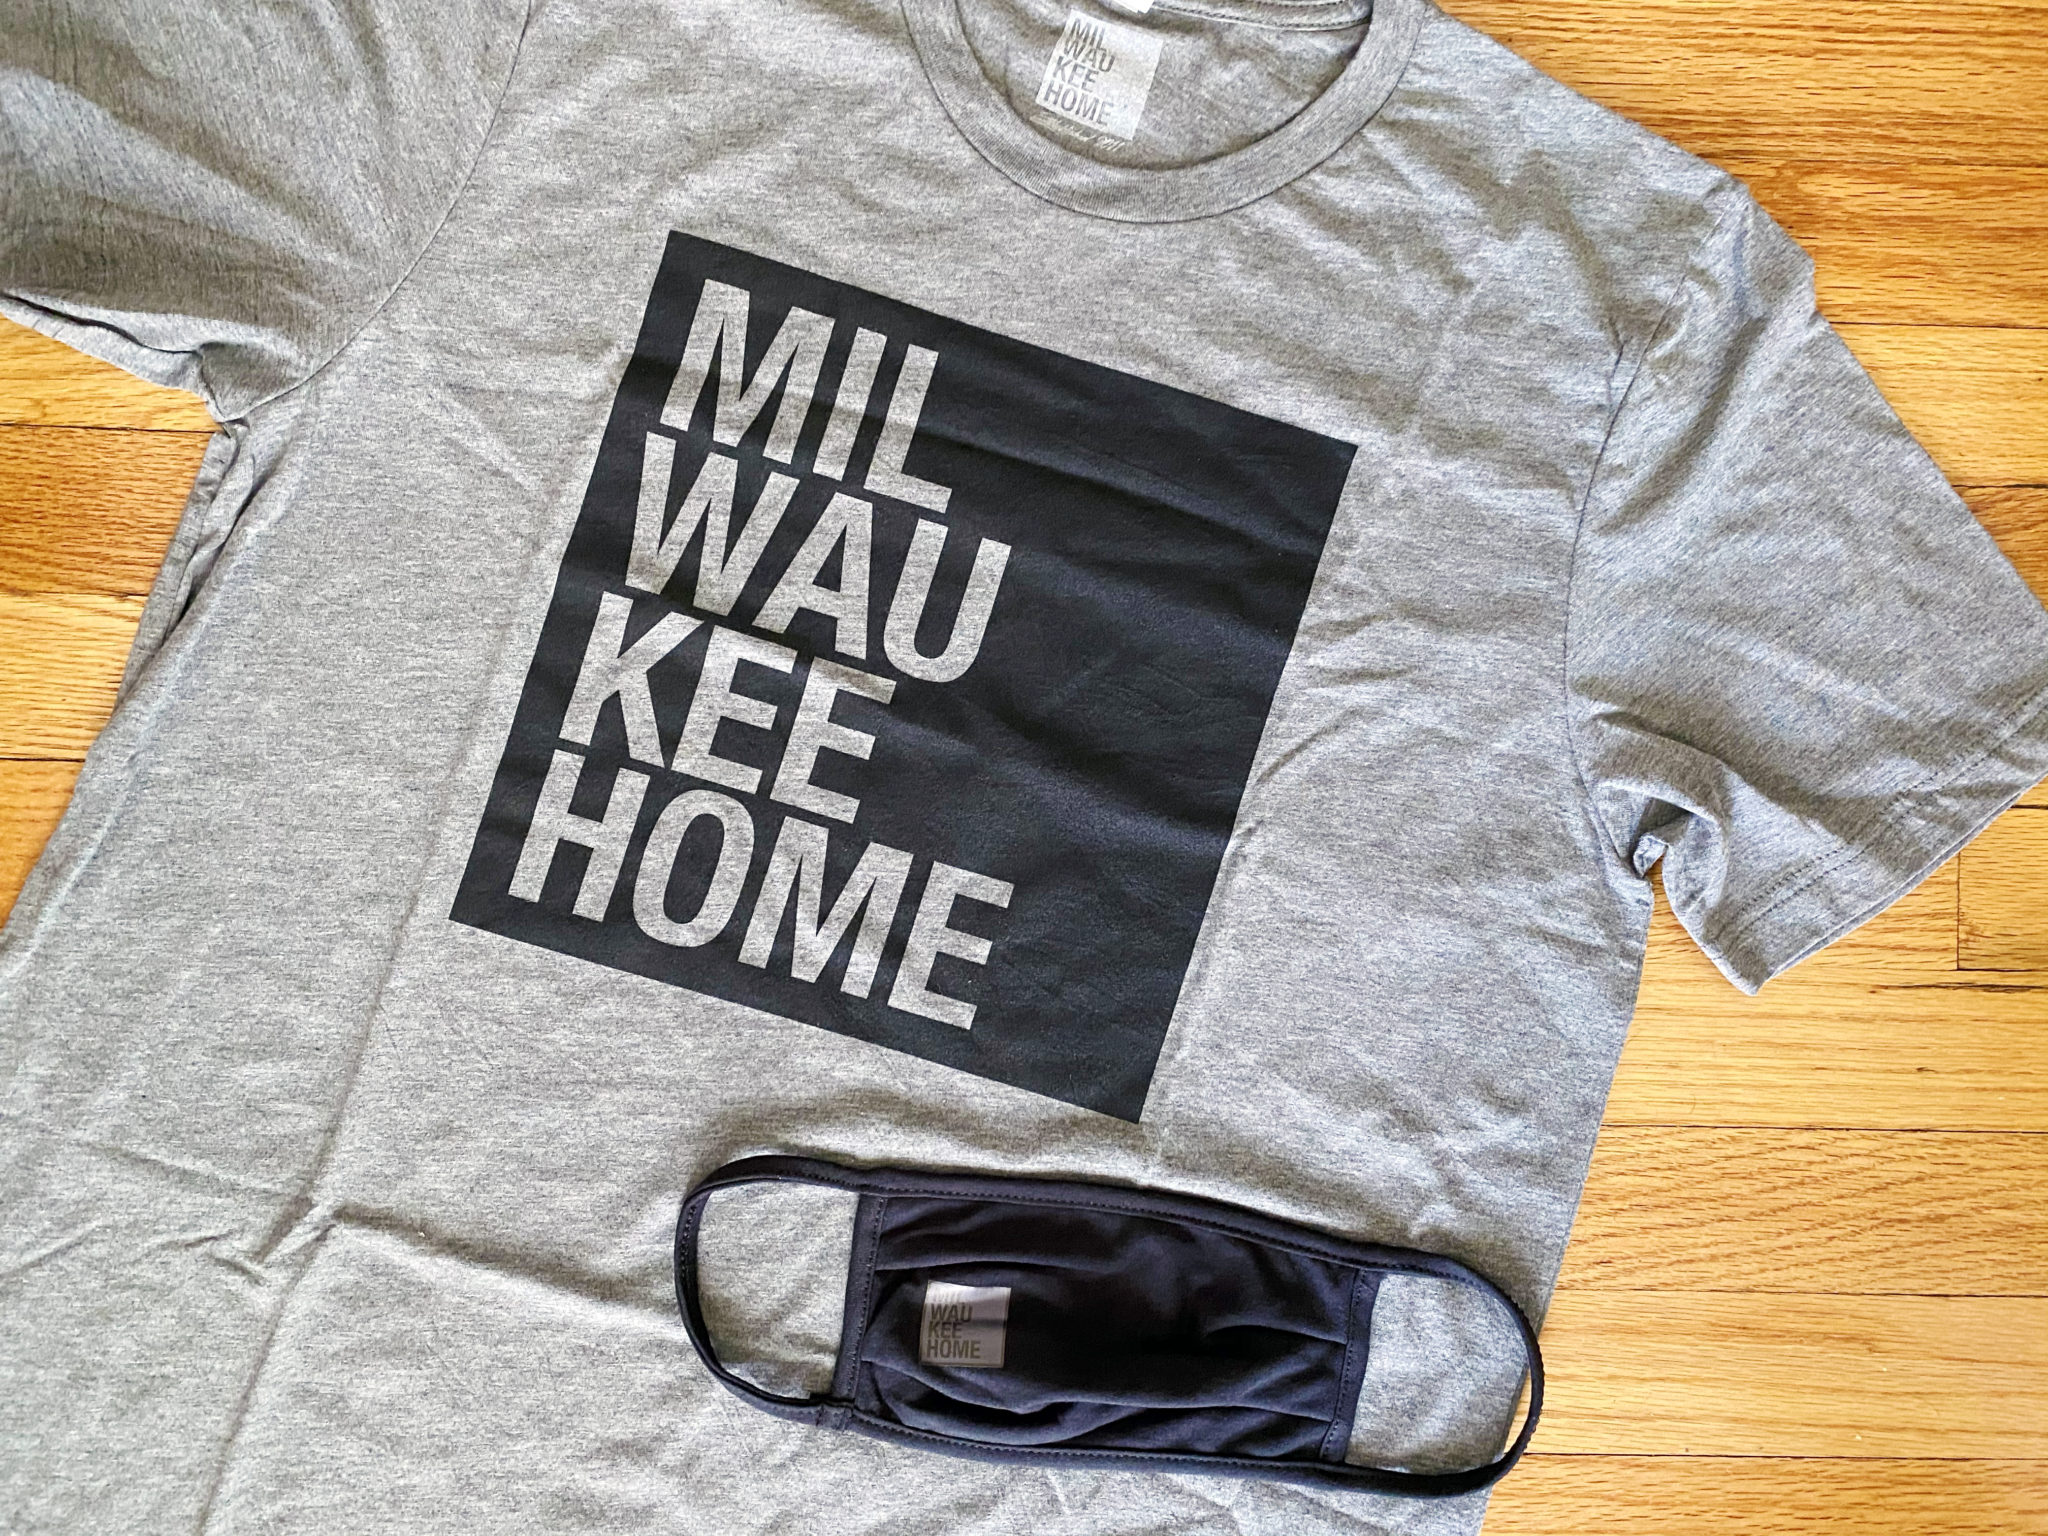 10 Apparel Companies to Get Your Milwaukee Gear From